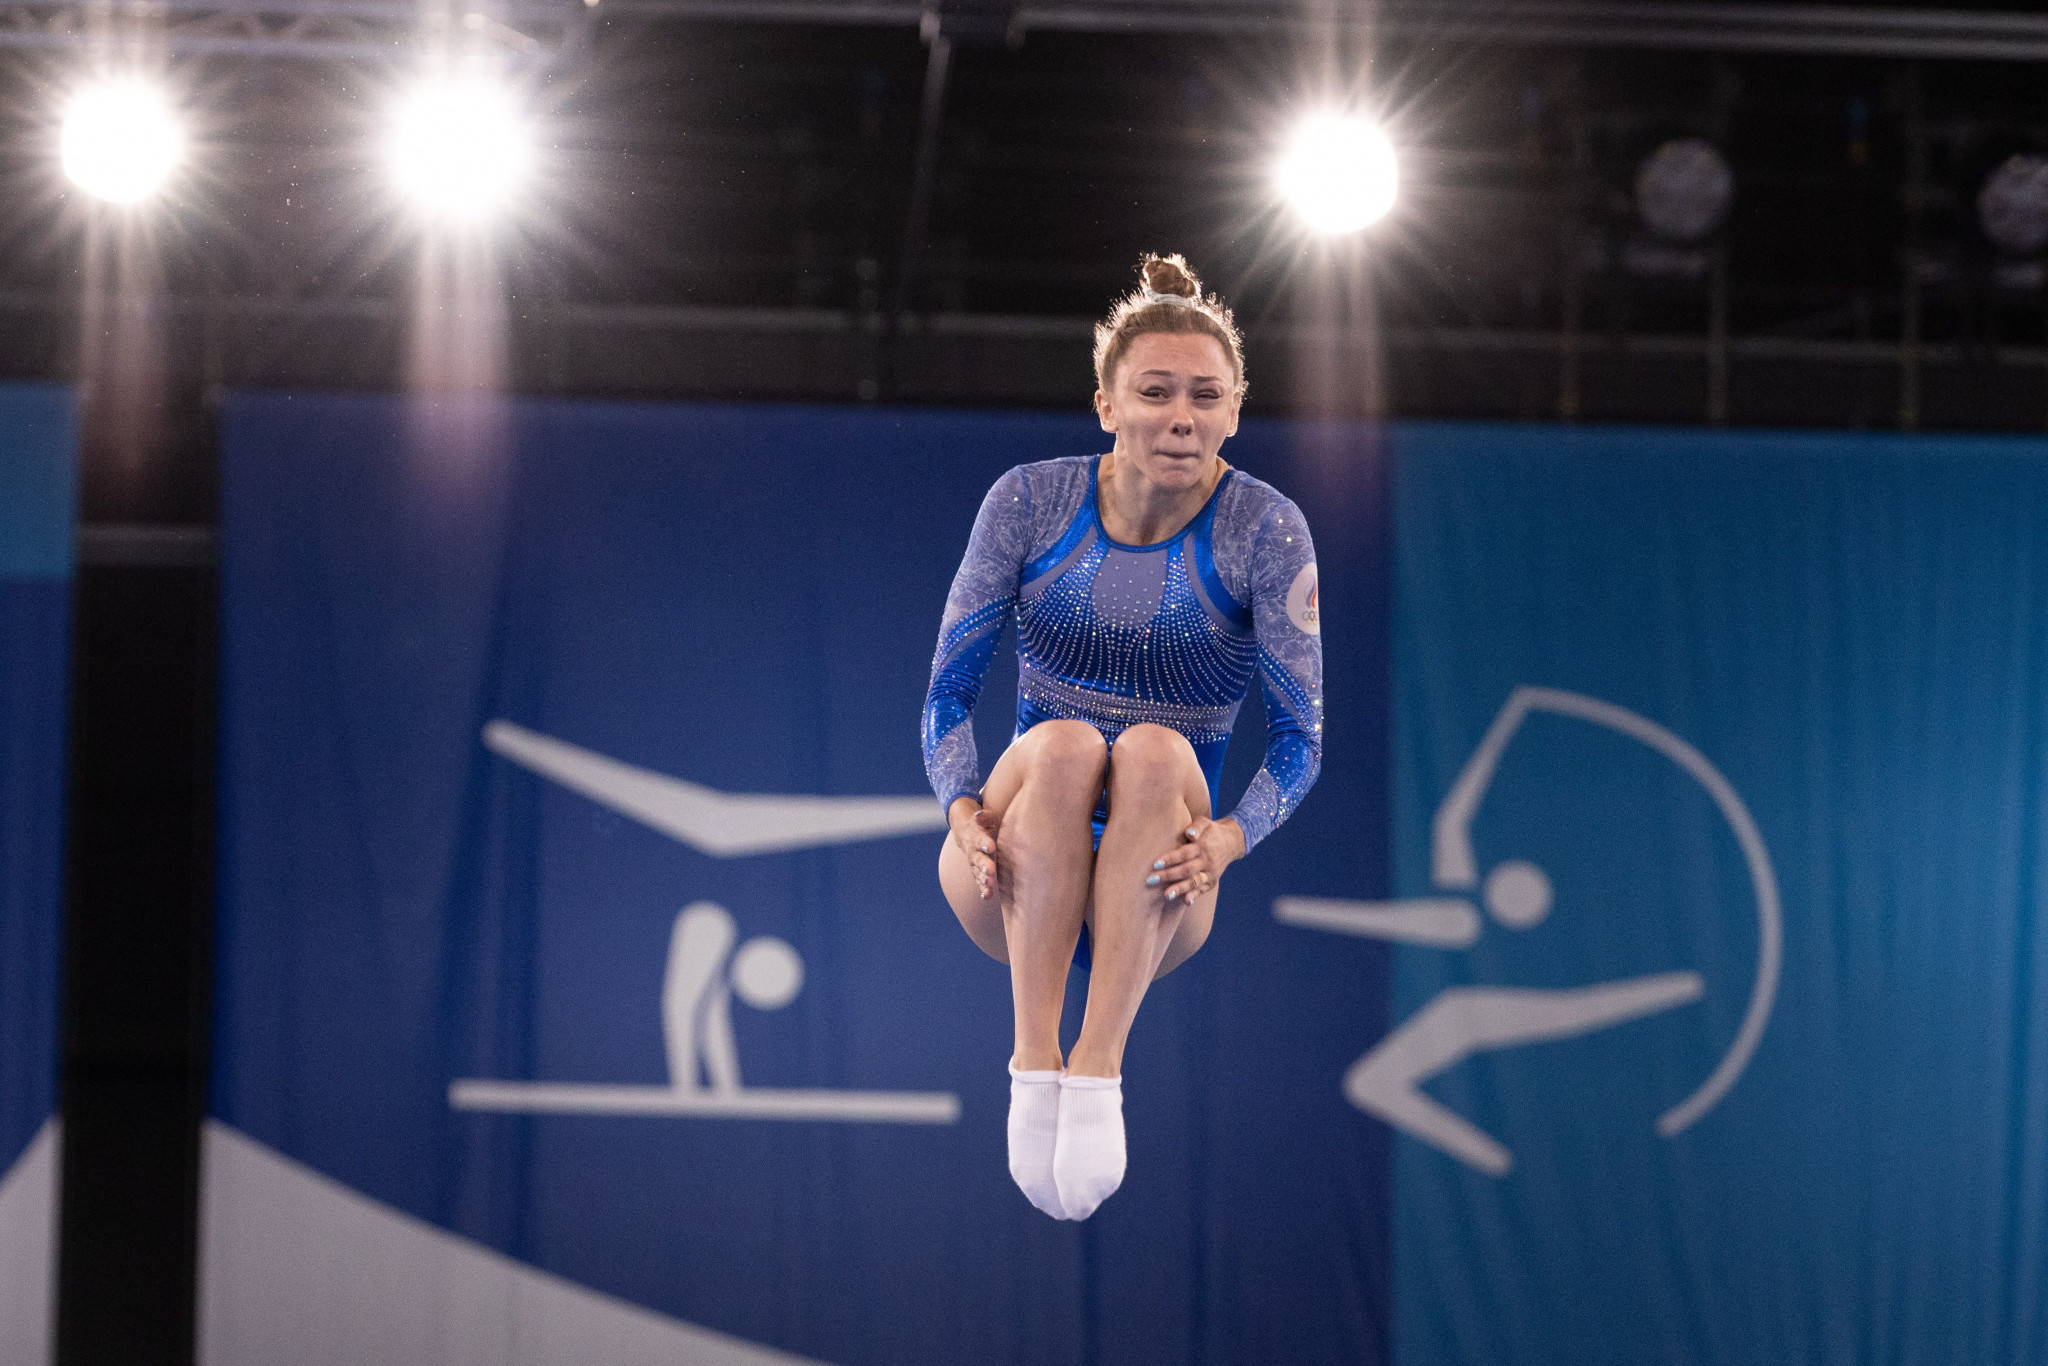 Iana Lebedeva of the Russian Gymnastics Federation led the way in the women's individual event with 104.785 ©Getty Images